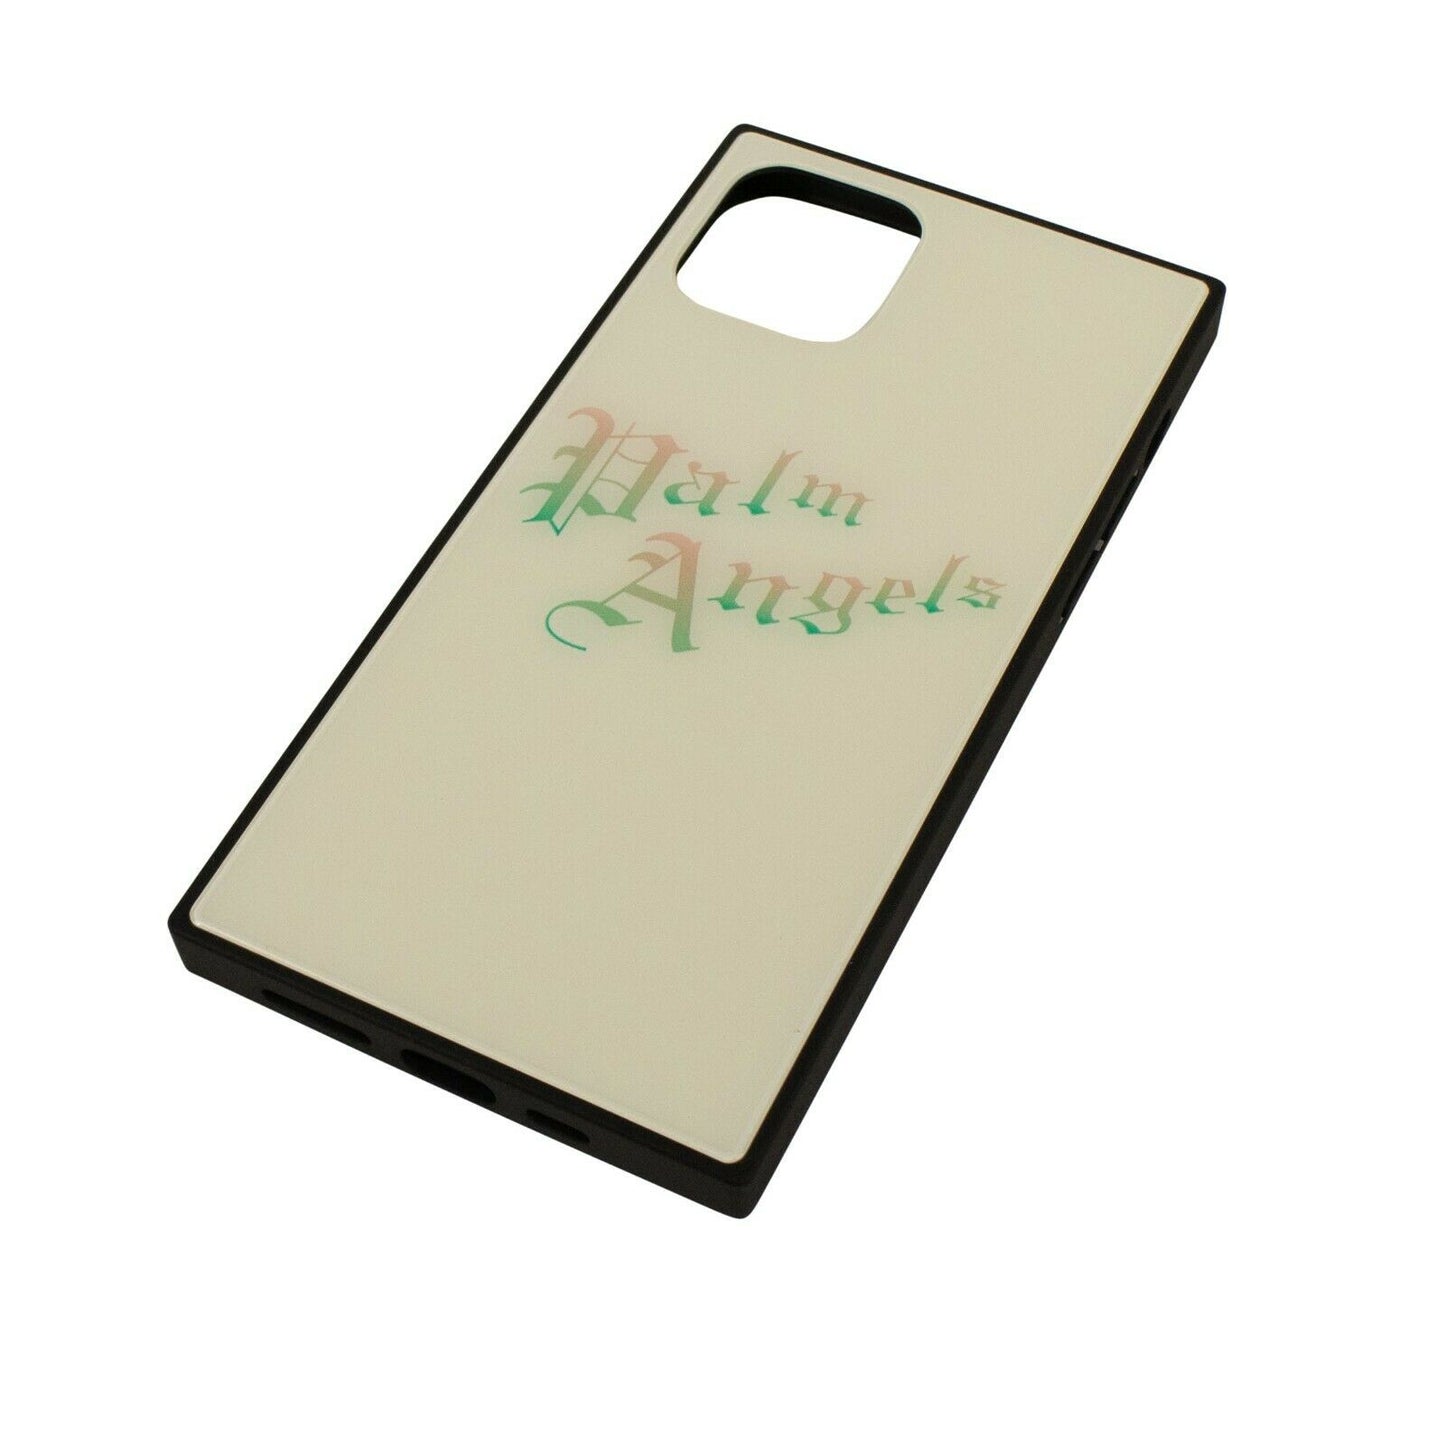 Palm Angels Gothic Square Phone Case - White